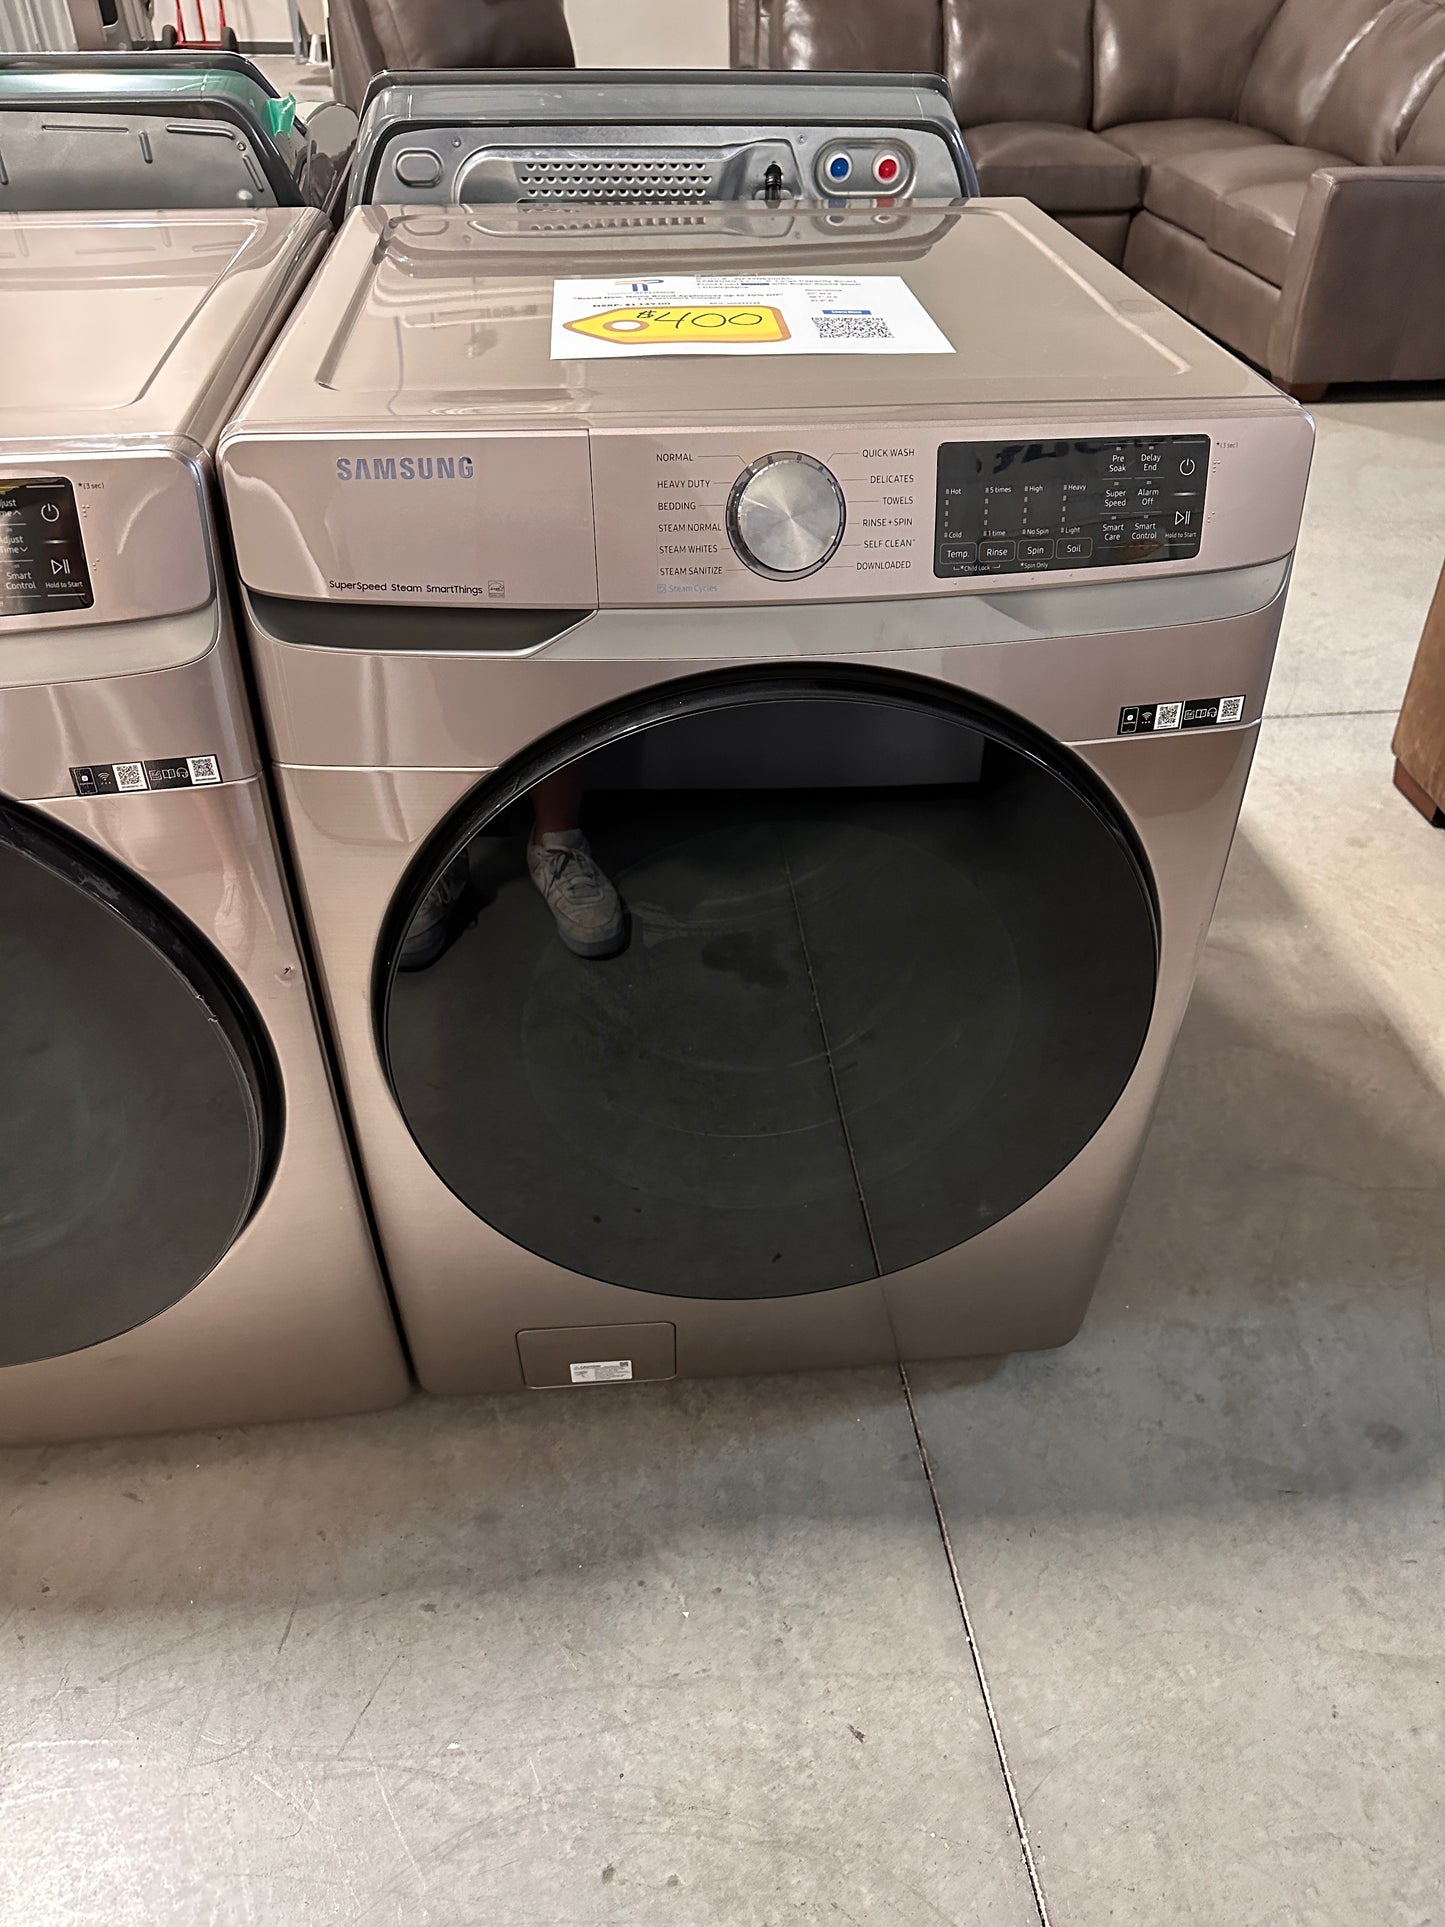 SAMSUNG LARGE CAPACITY FRONT LOAD WASHER - MODEL: WF45B6300AC  WAS13124